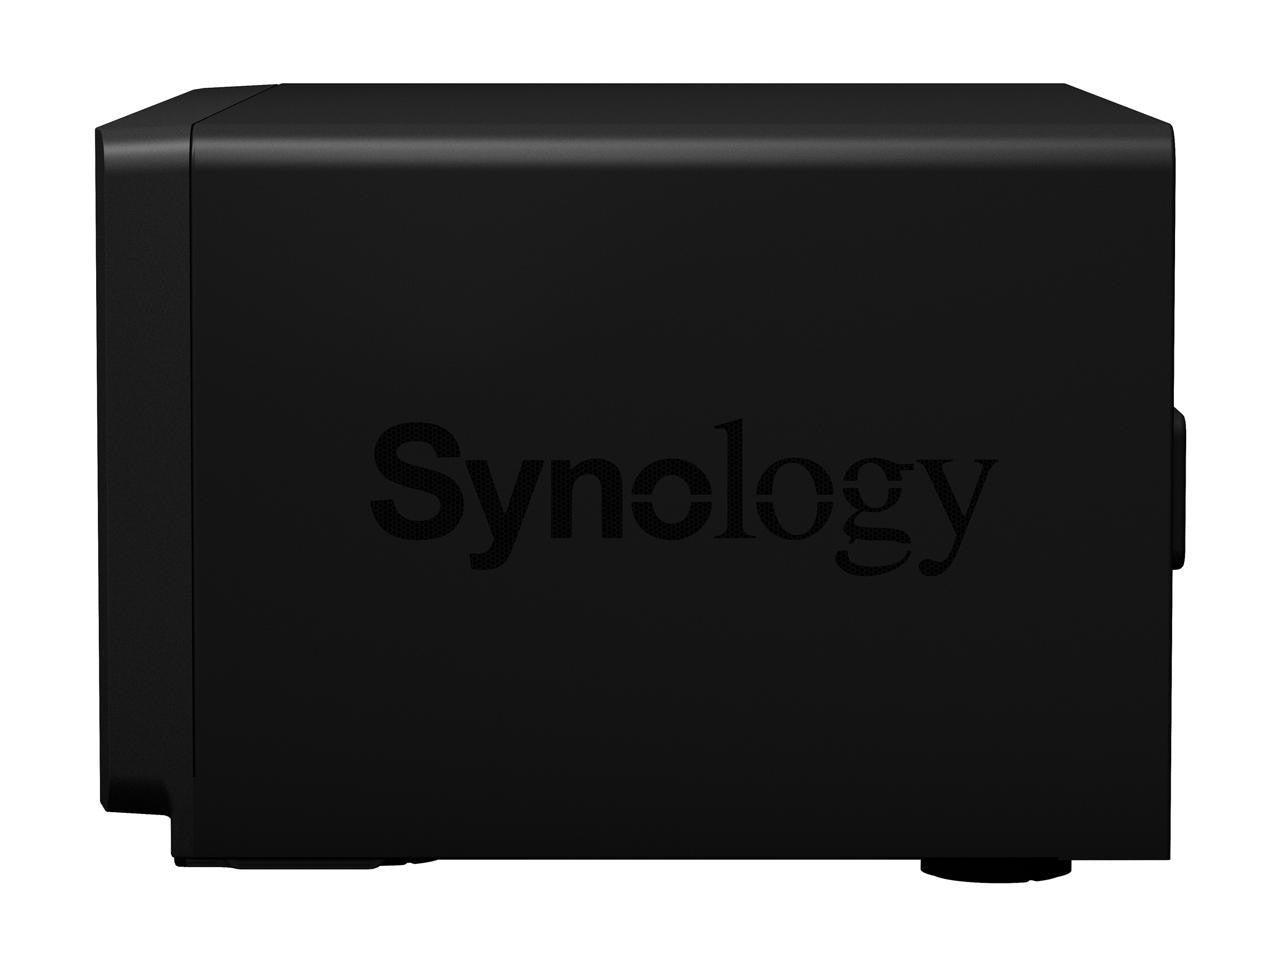 Synology DS1821+ 8-BAY DiskStation with 4GB Synology RAM and 128TB (8x16TB) Synology Enterprise HAT5300 Drives Fully Assembled and Tested